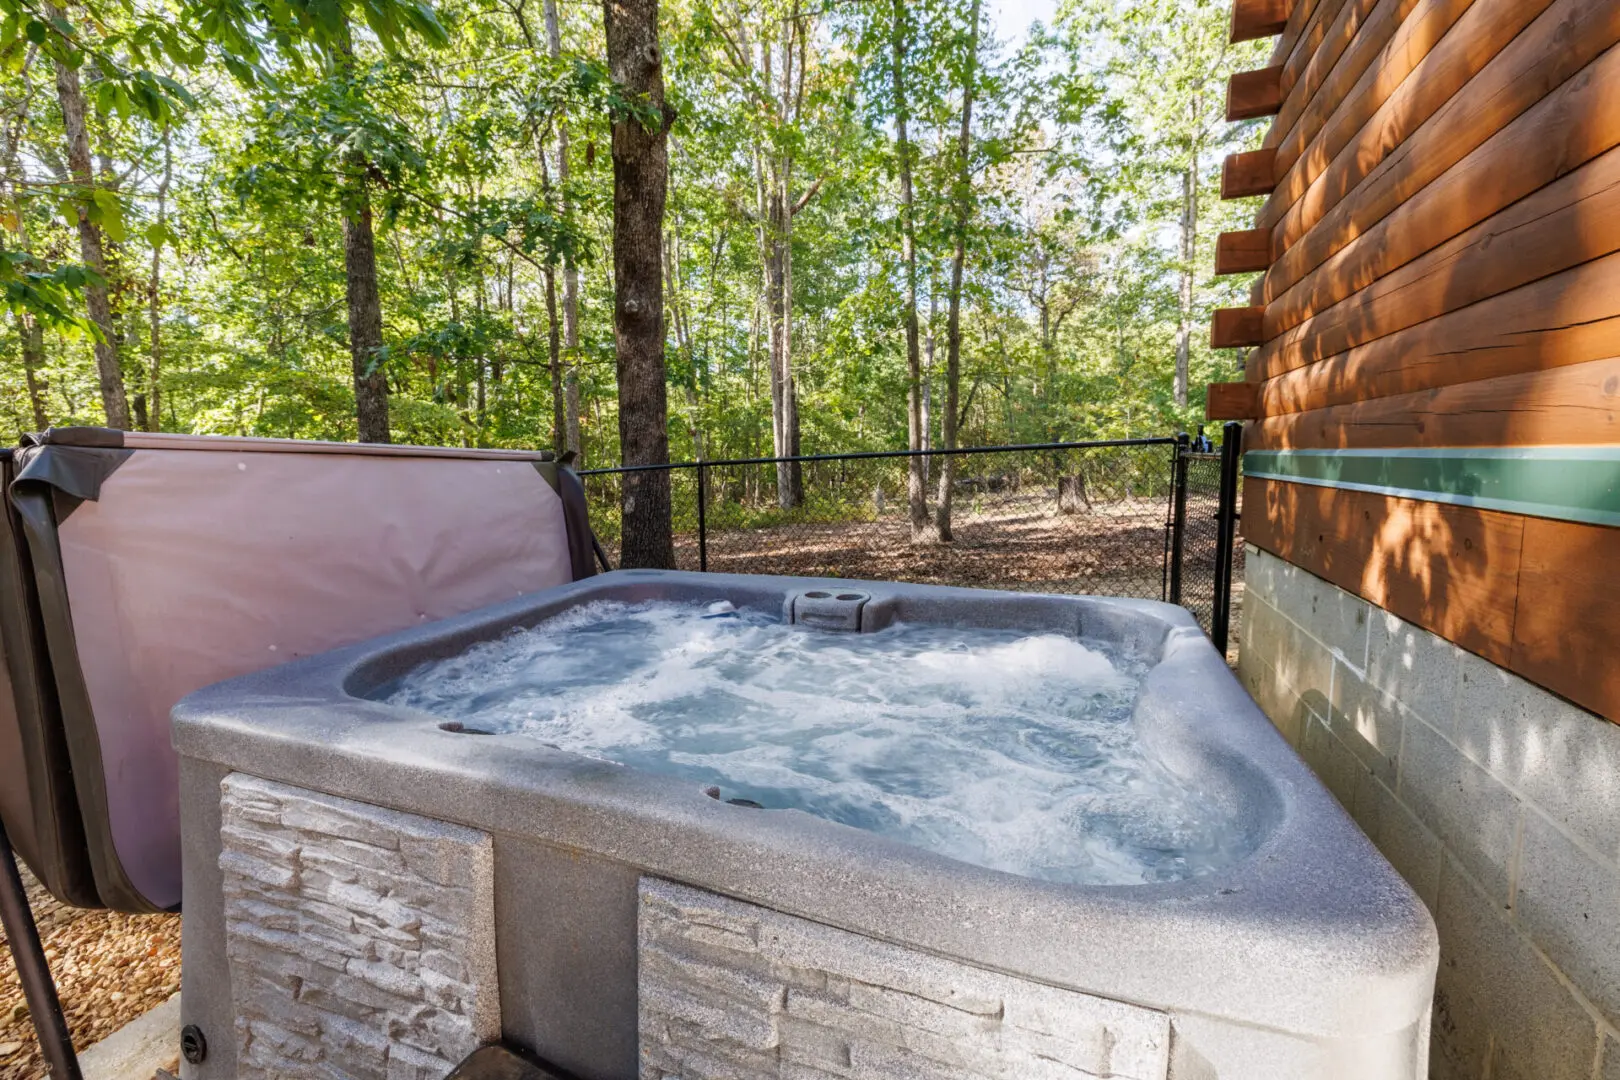 A hot tub in front of a cabin in the woods.